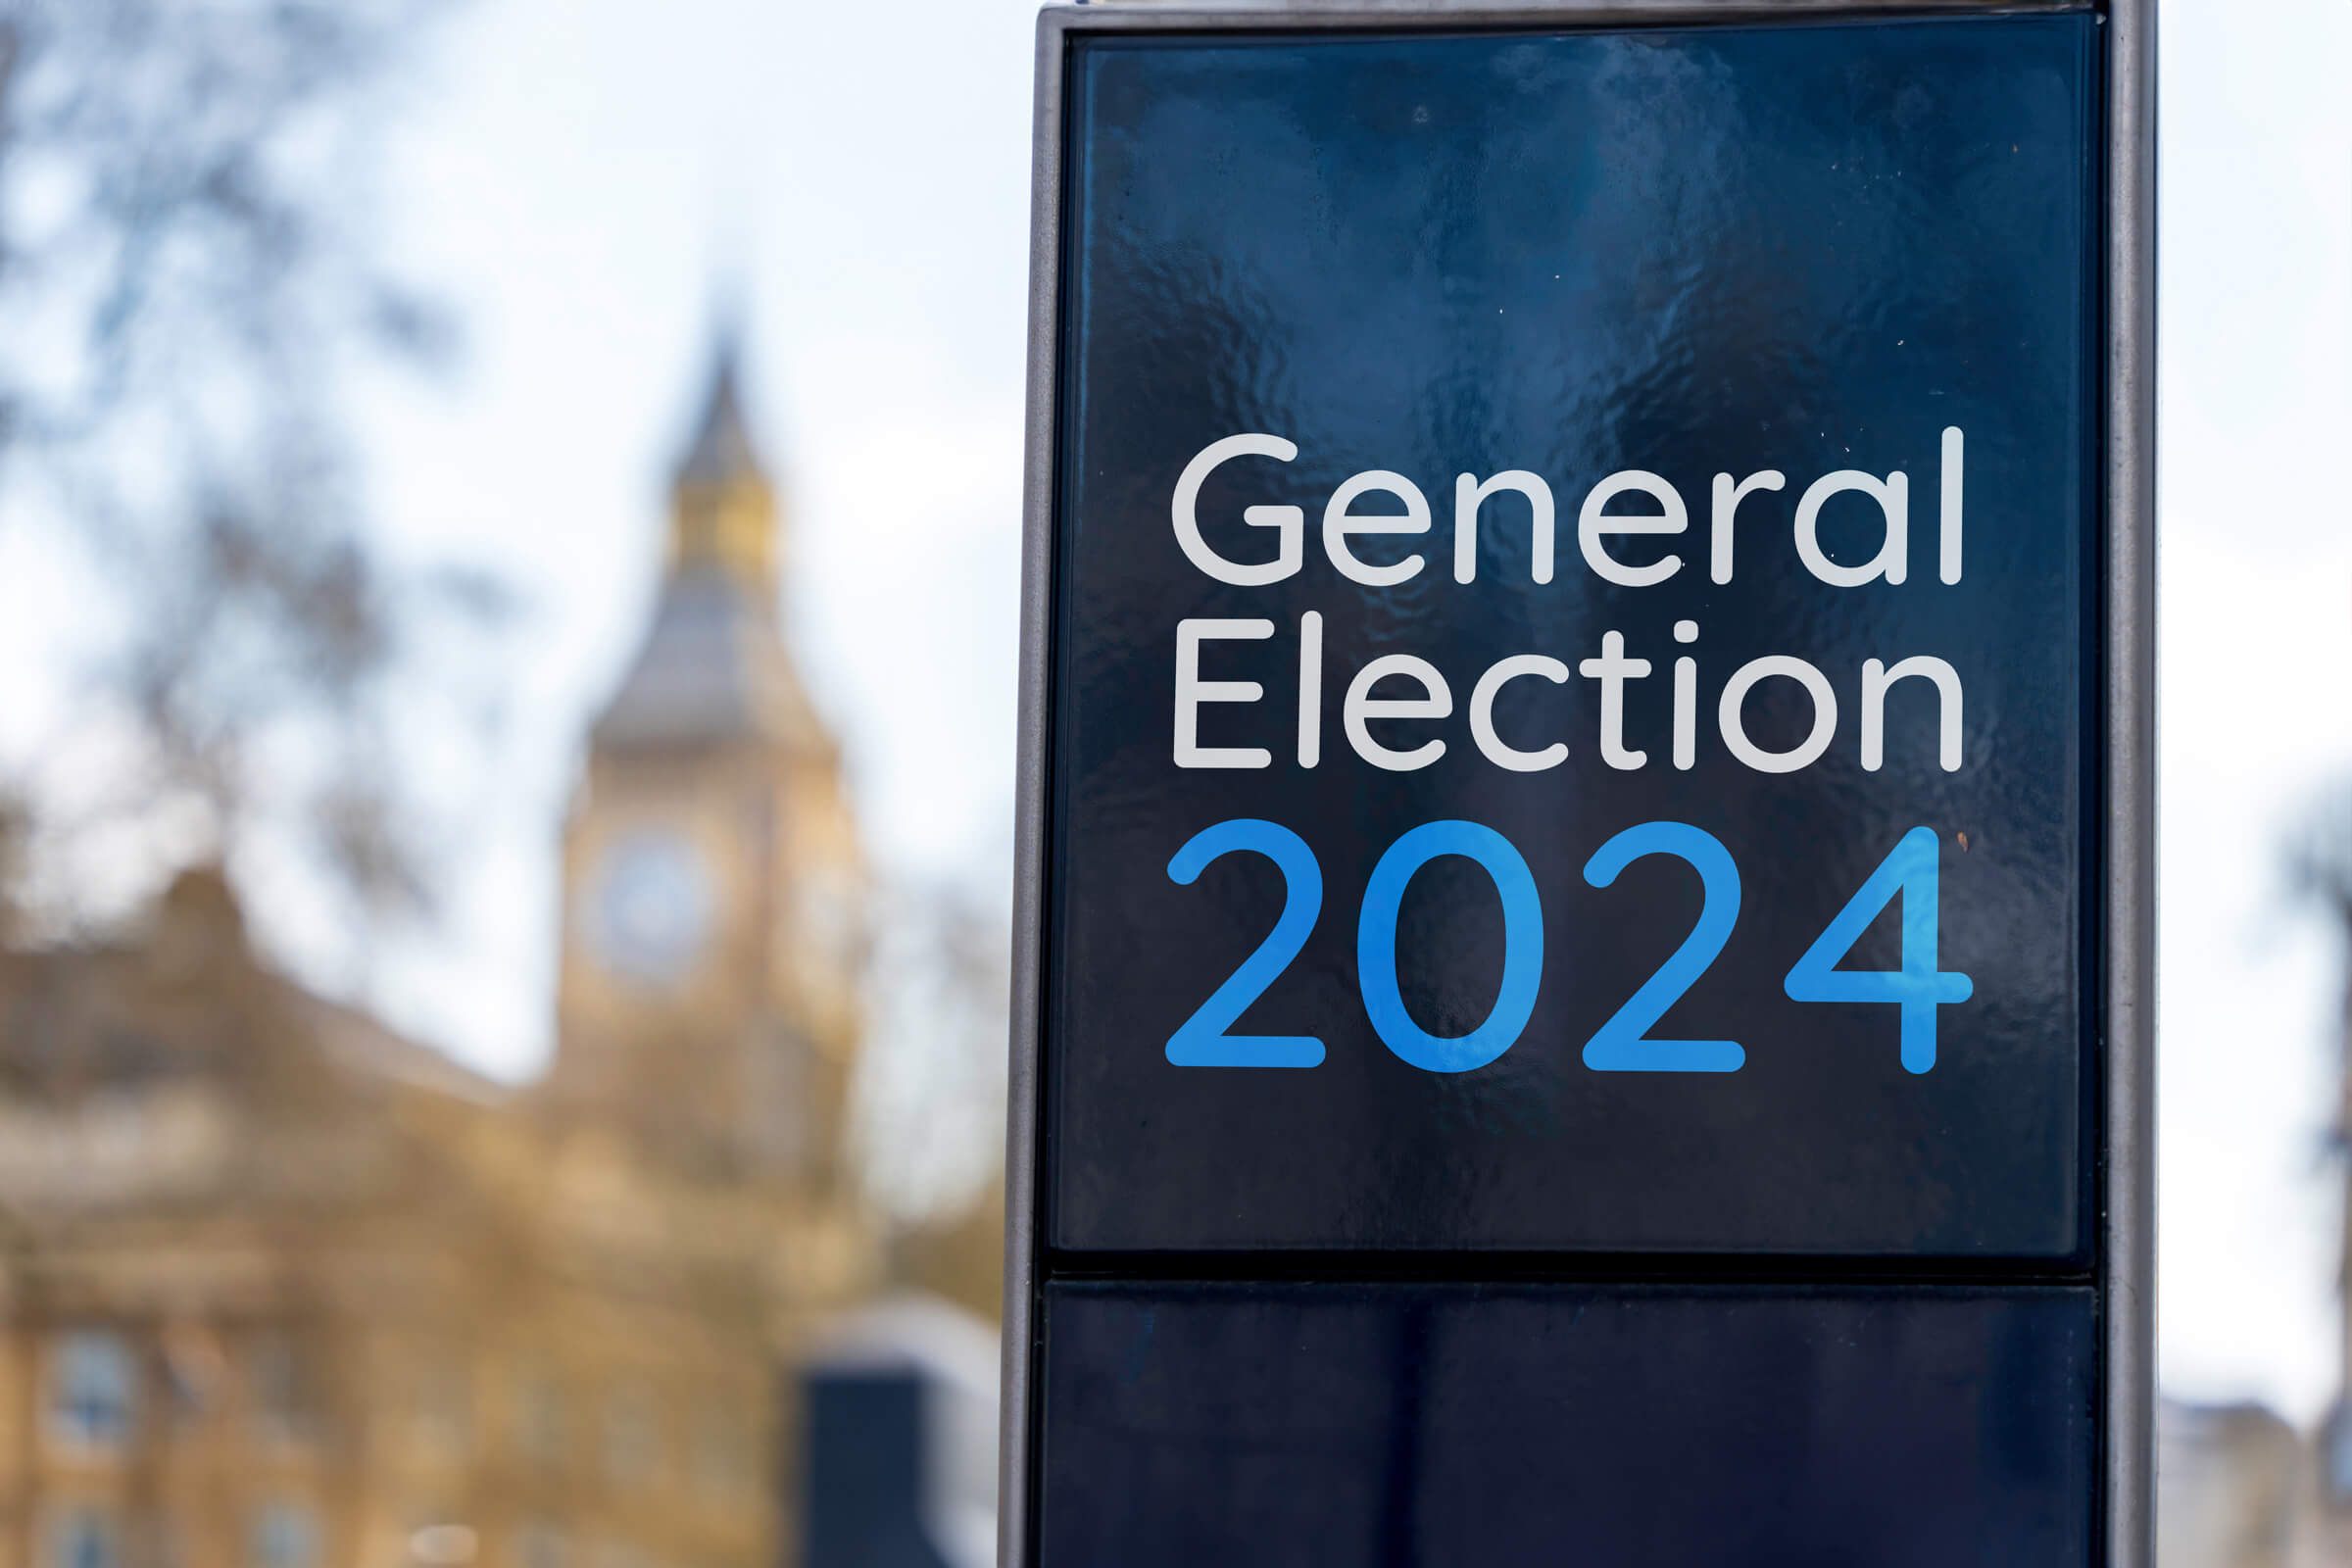 General Election 2024: The proposed plans for education